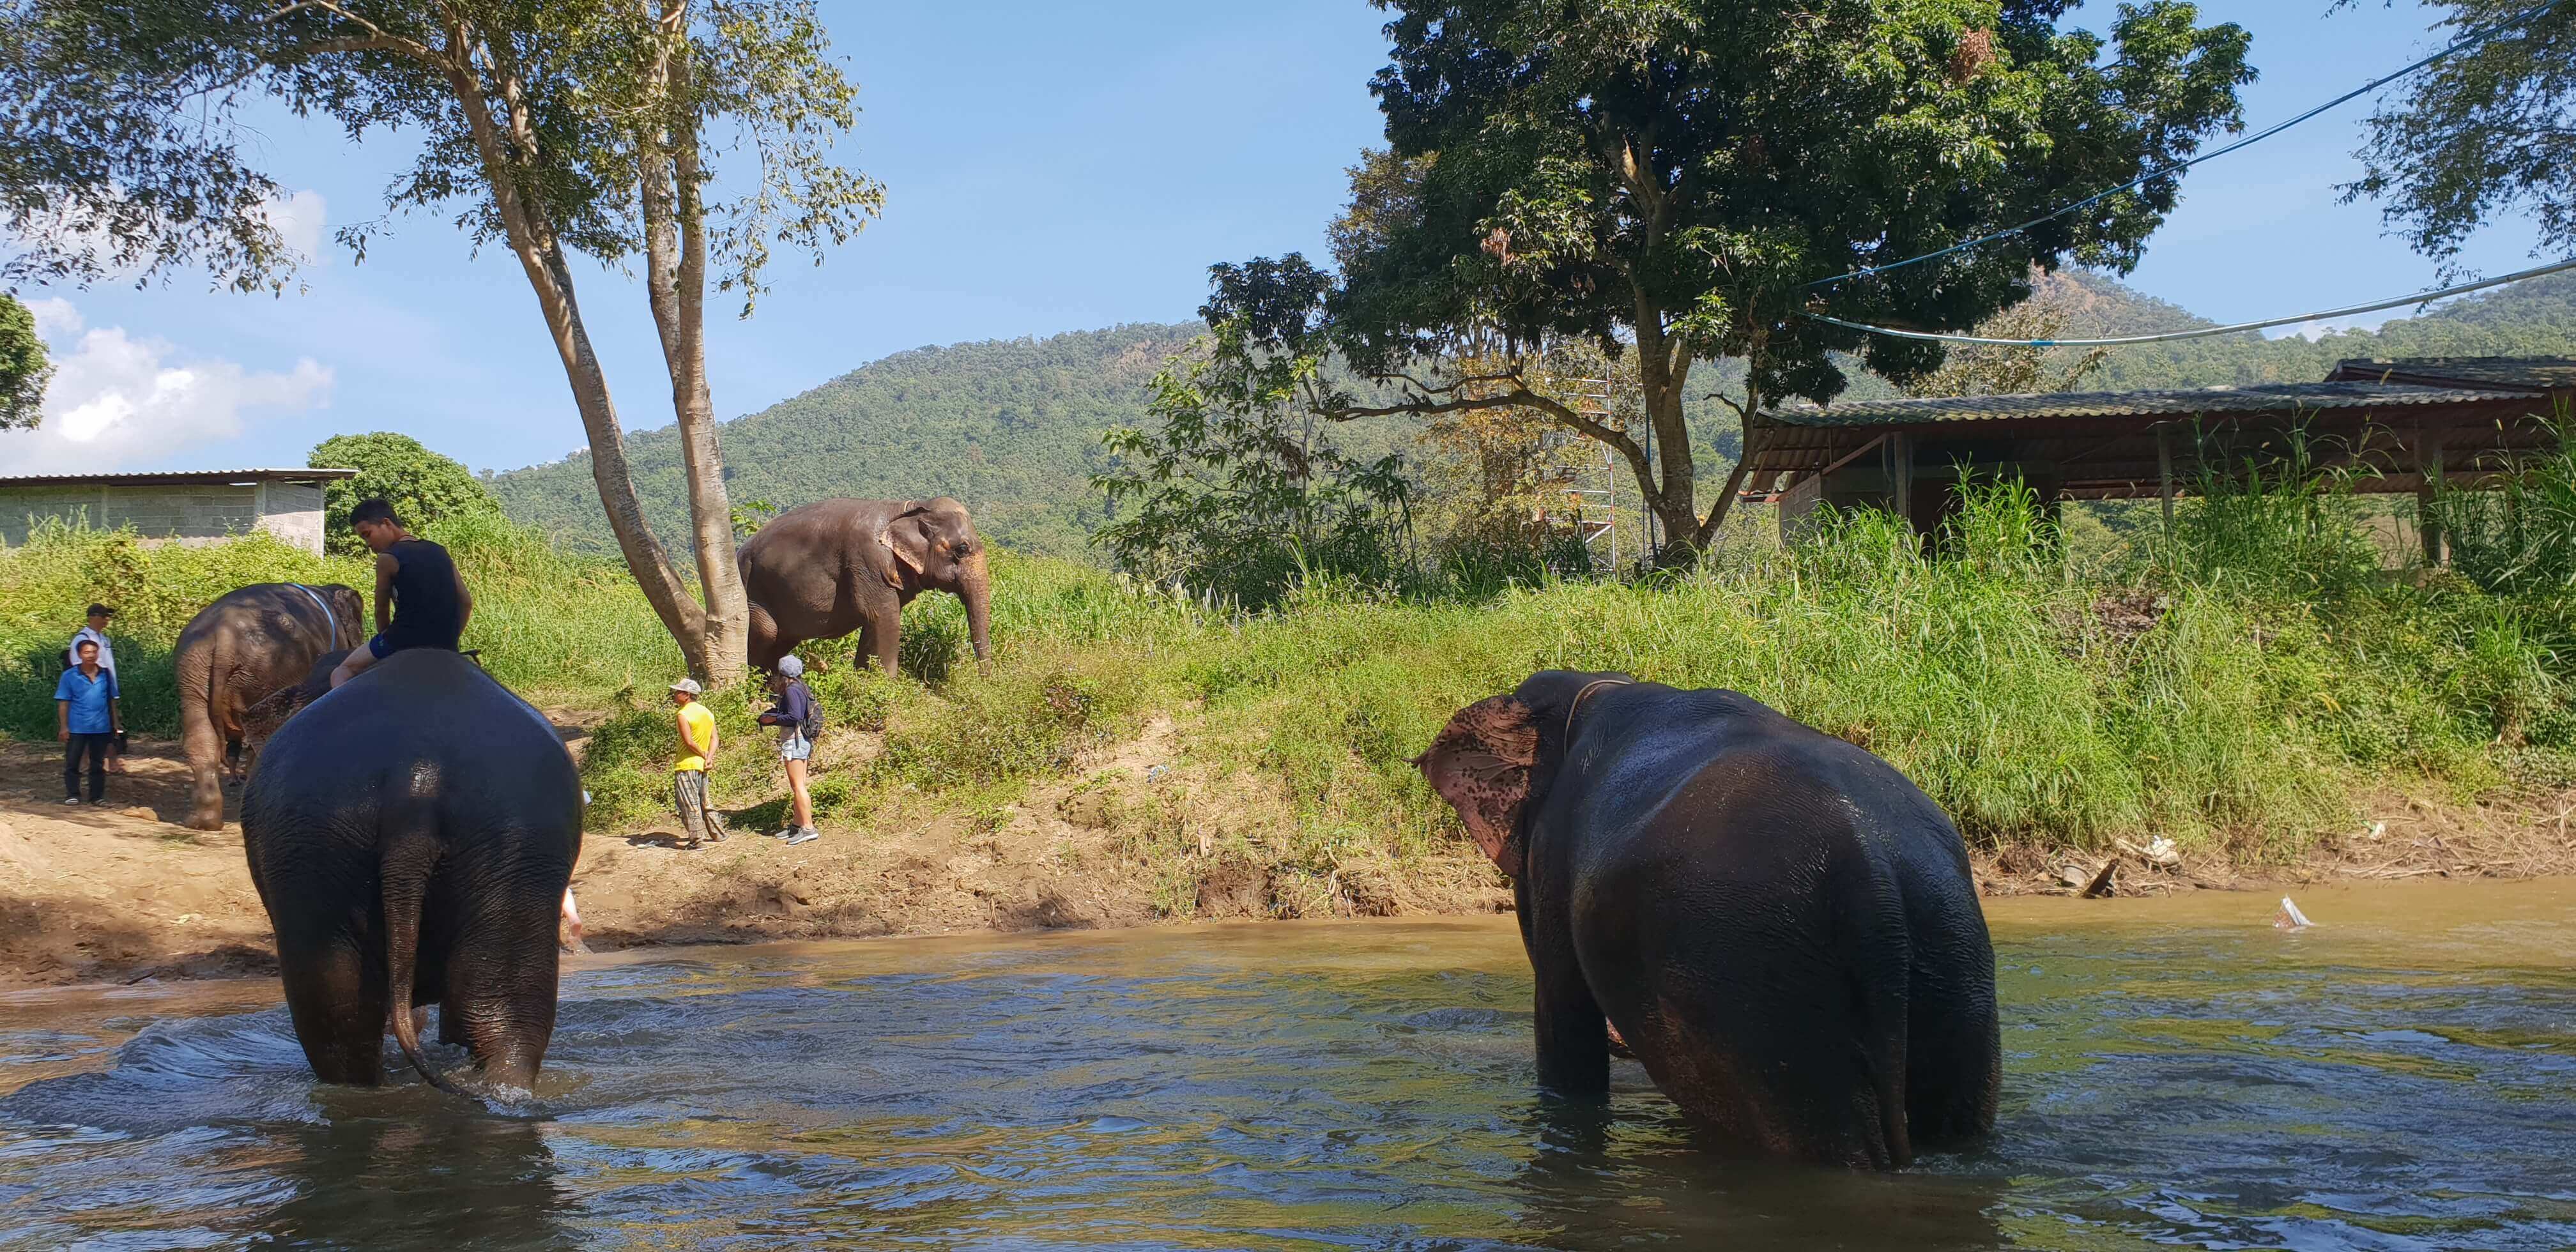 Elephants bathing in the Mae Taeng river